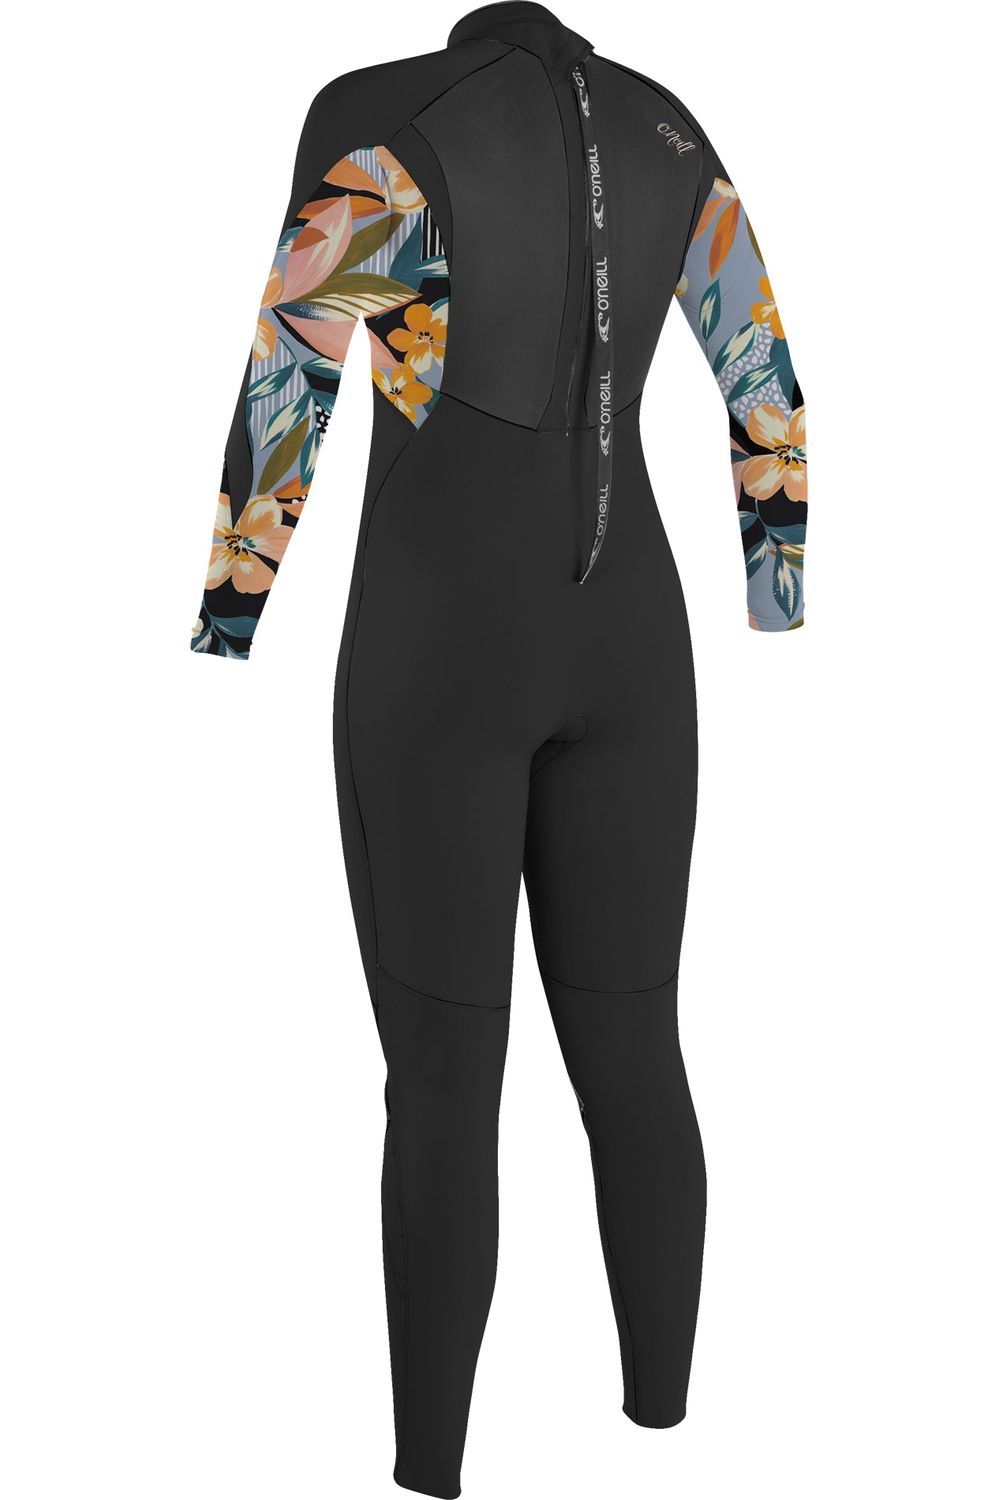 O'Neill Epic Women's Wetsuit 3/2 With Back Zip in Black & Demiflor